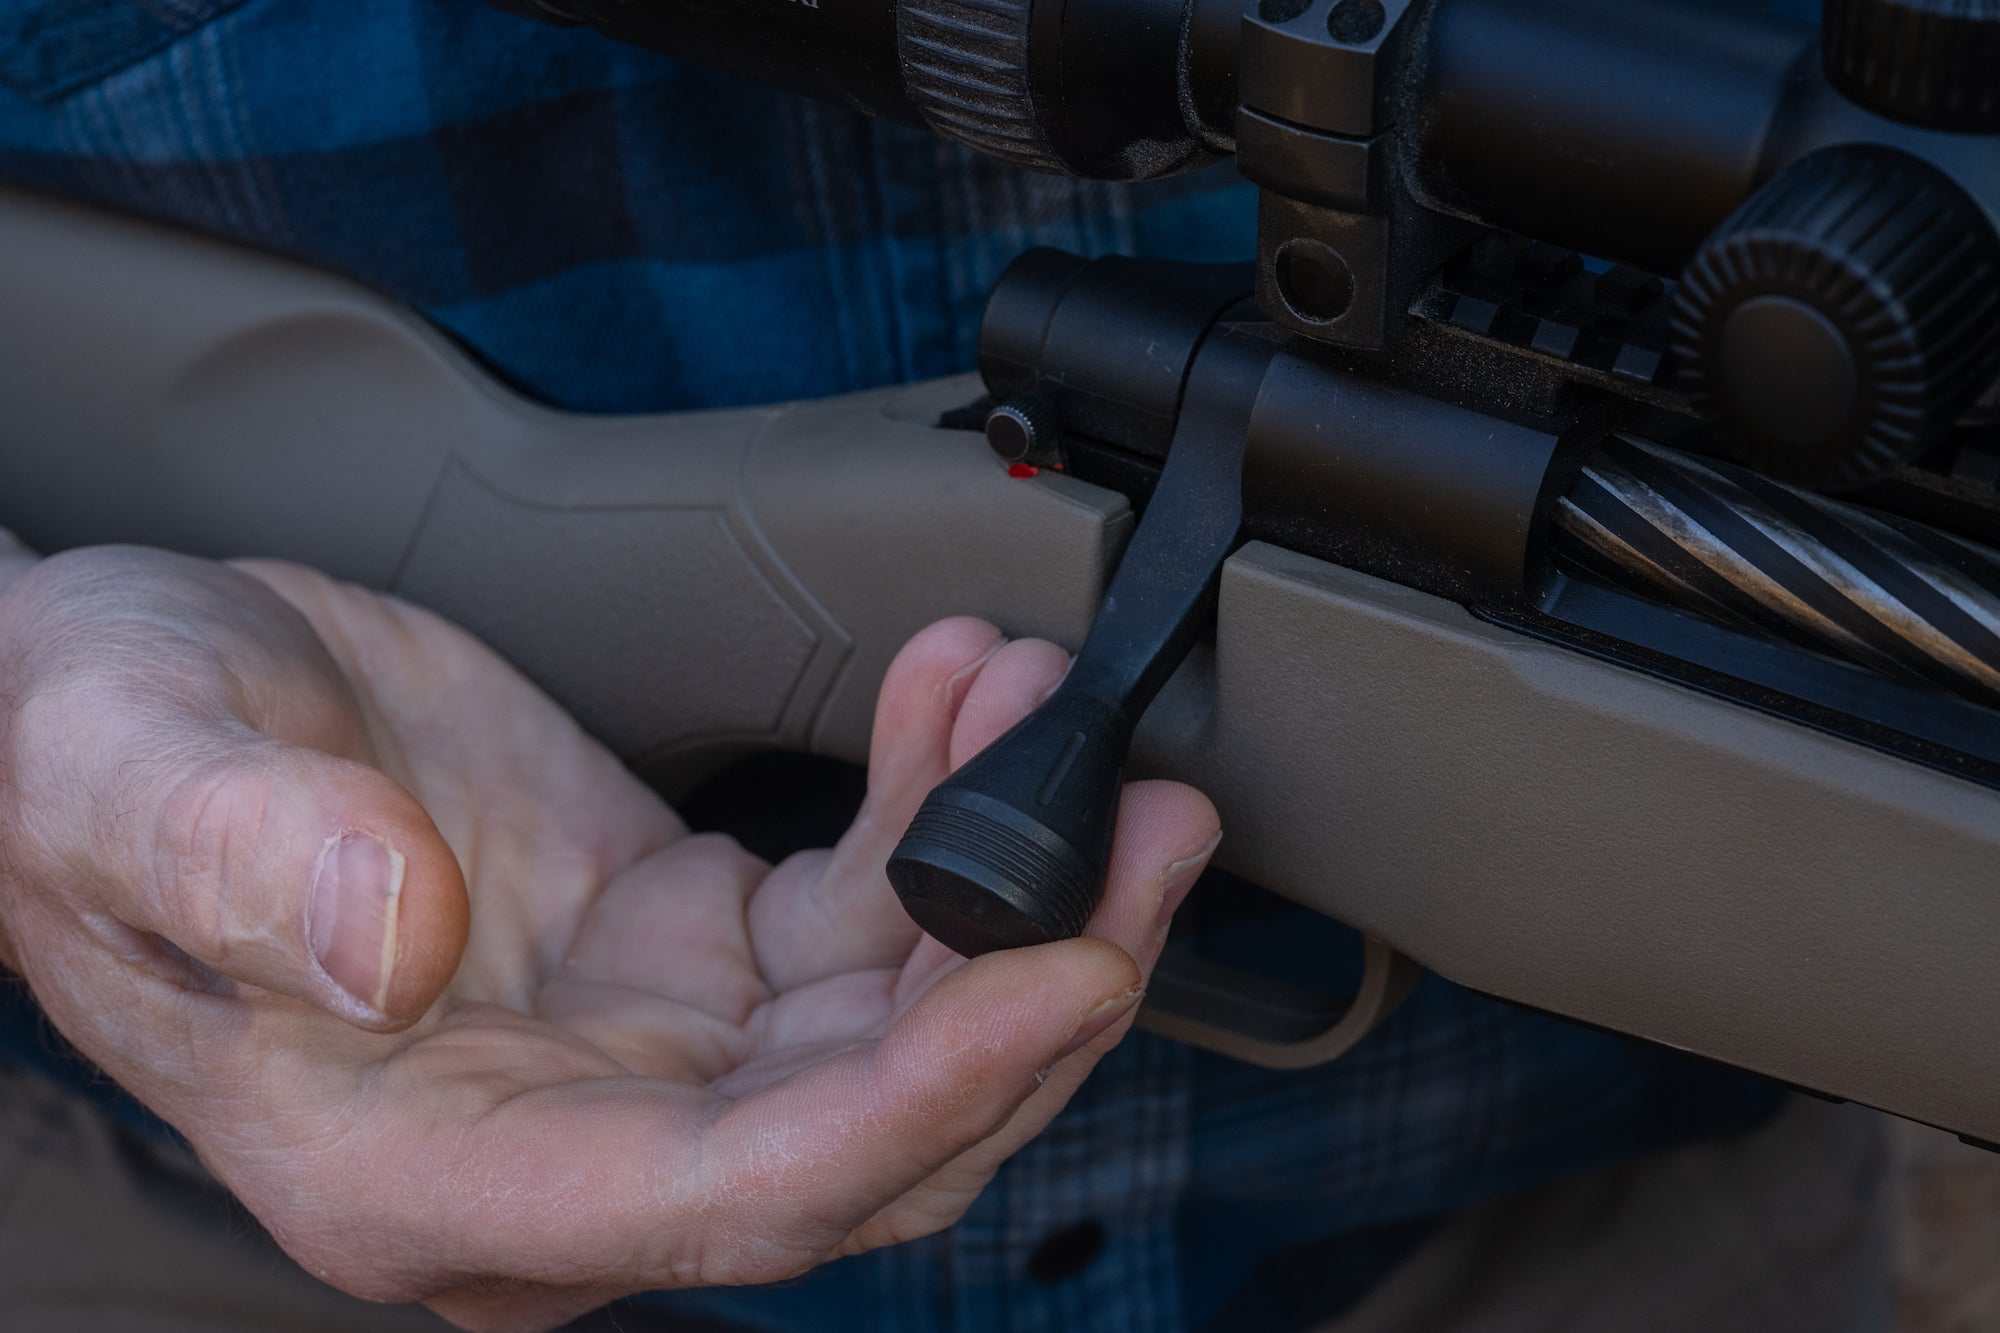 Hunter showing the bolt handle on a Mossberg Patriot Predator Rifle in 7mm PRC.